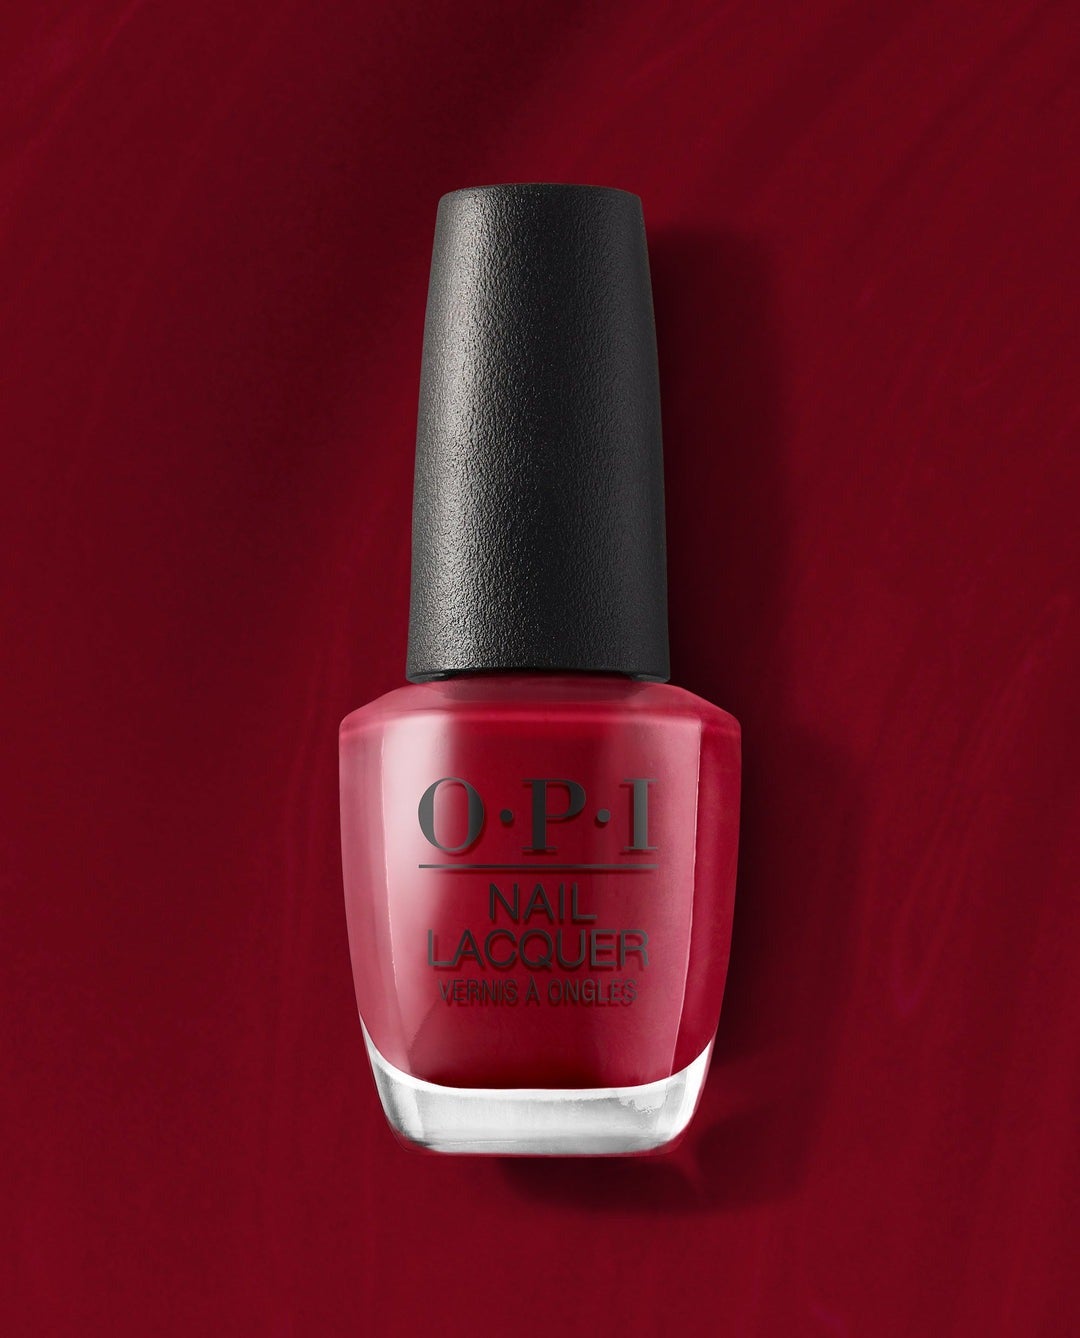 OPI + Nail Lacquer in Chick Flick Cherry